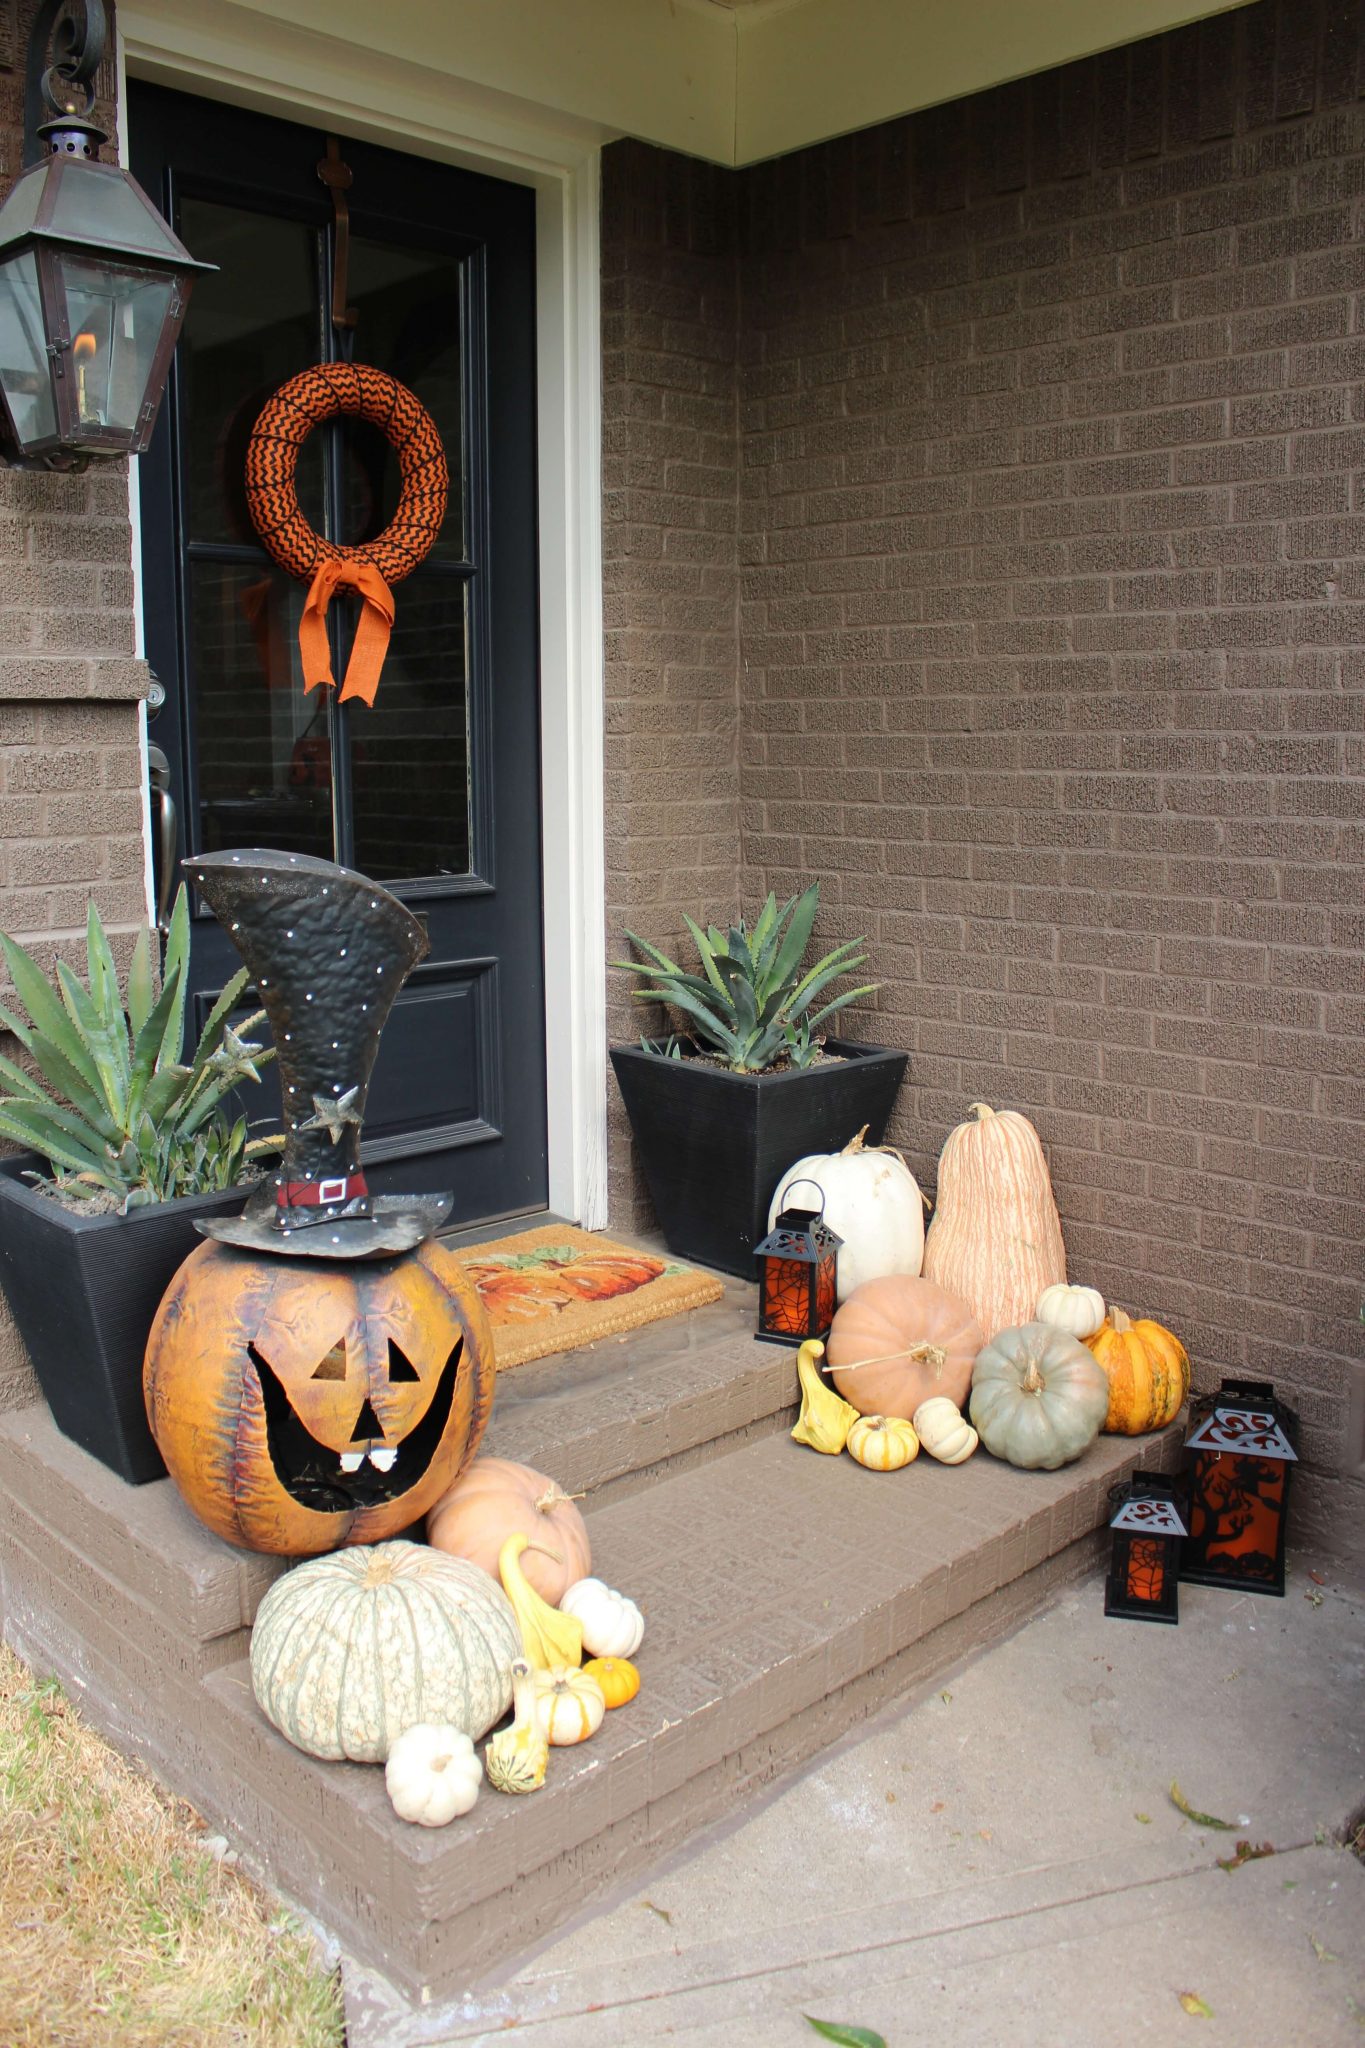 Decorating for Halloween // www.https://www.thehisfor.com